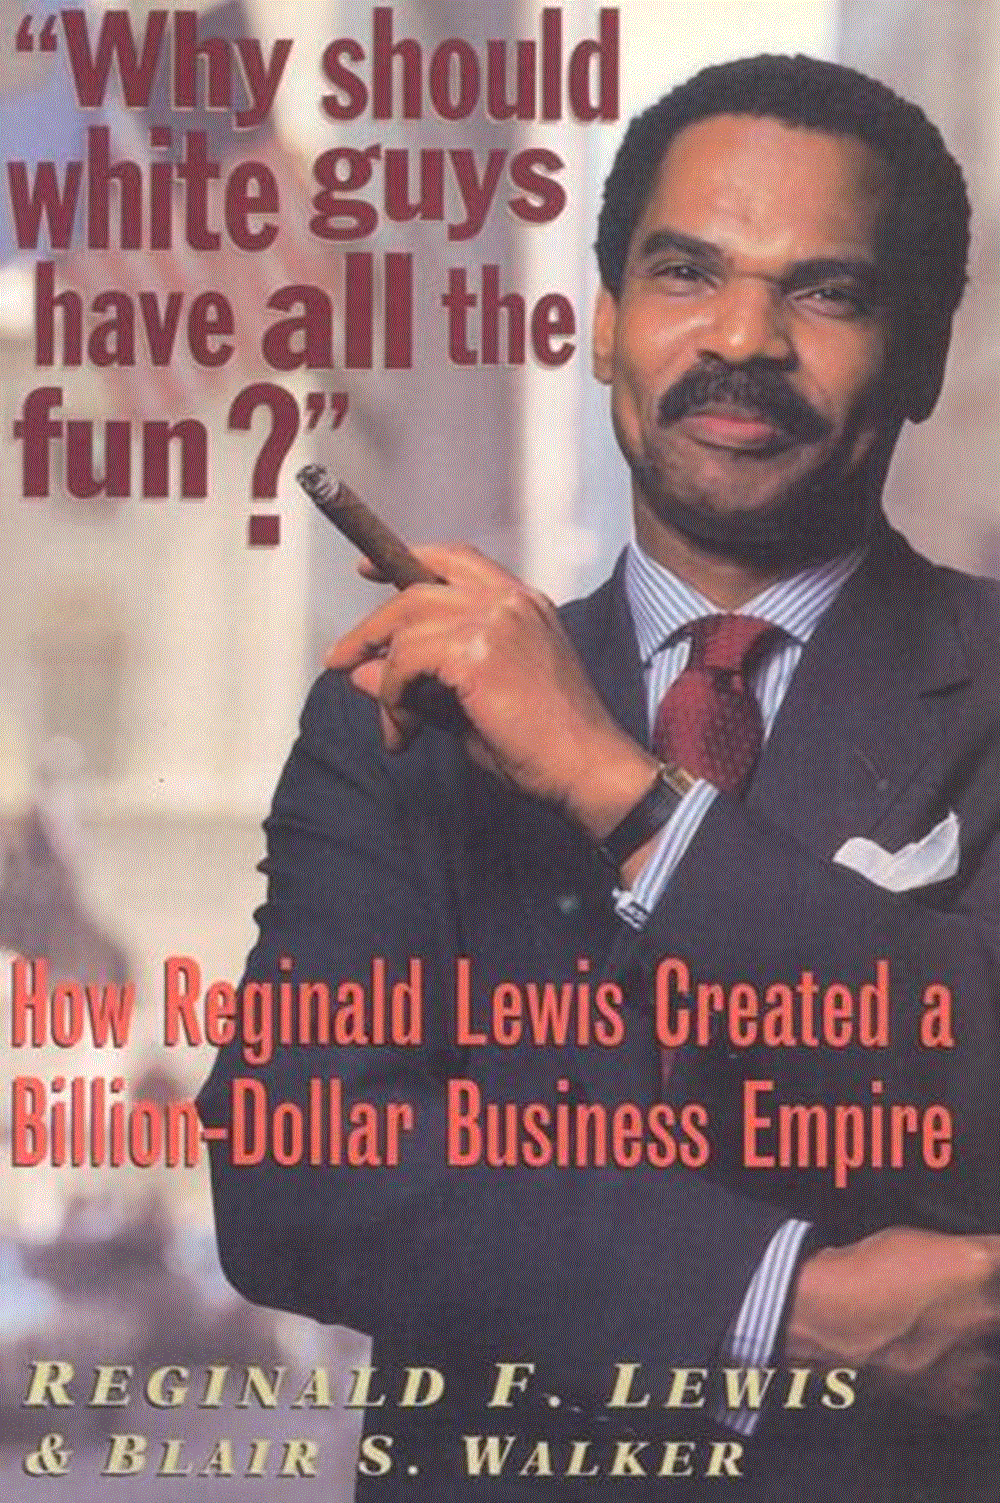 Why Should White Guys Have All the Fun? How Reginald Lewis Created a Billion-Dollar Business Empire